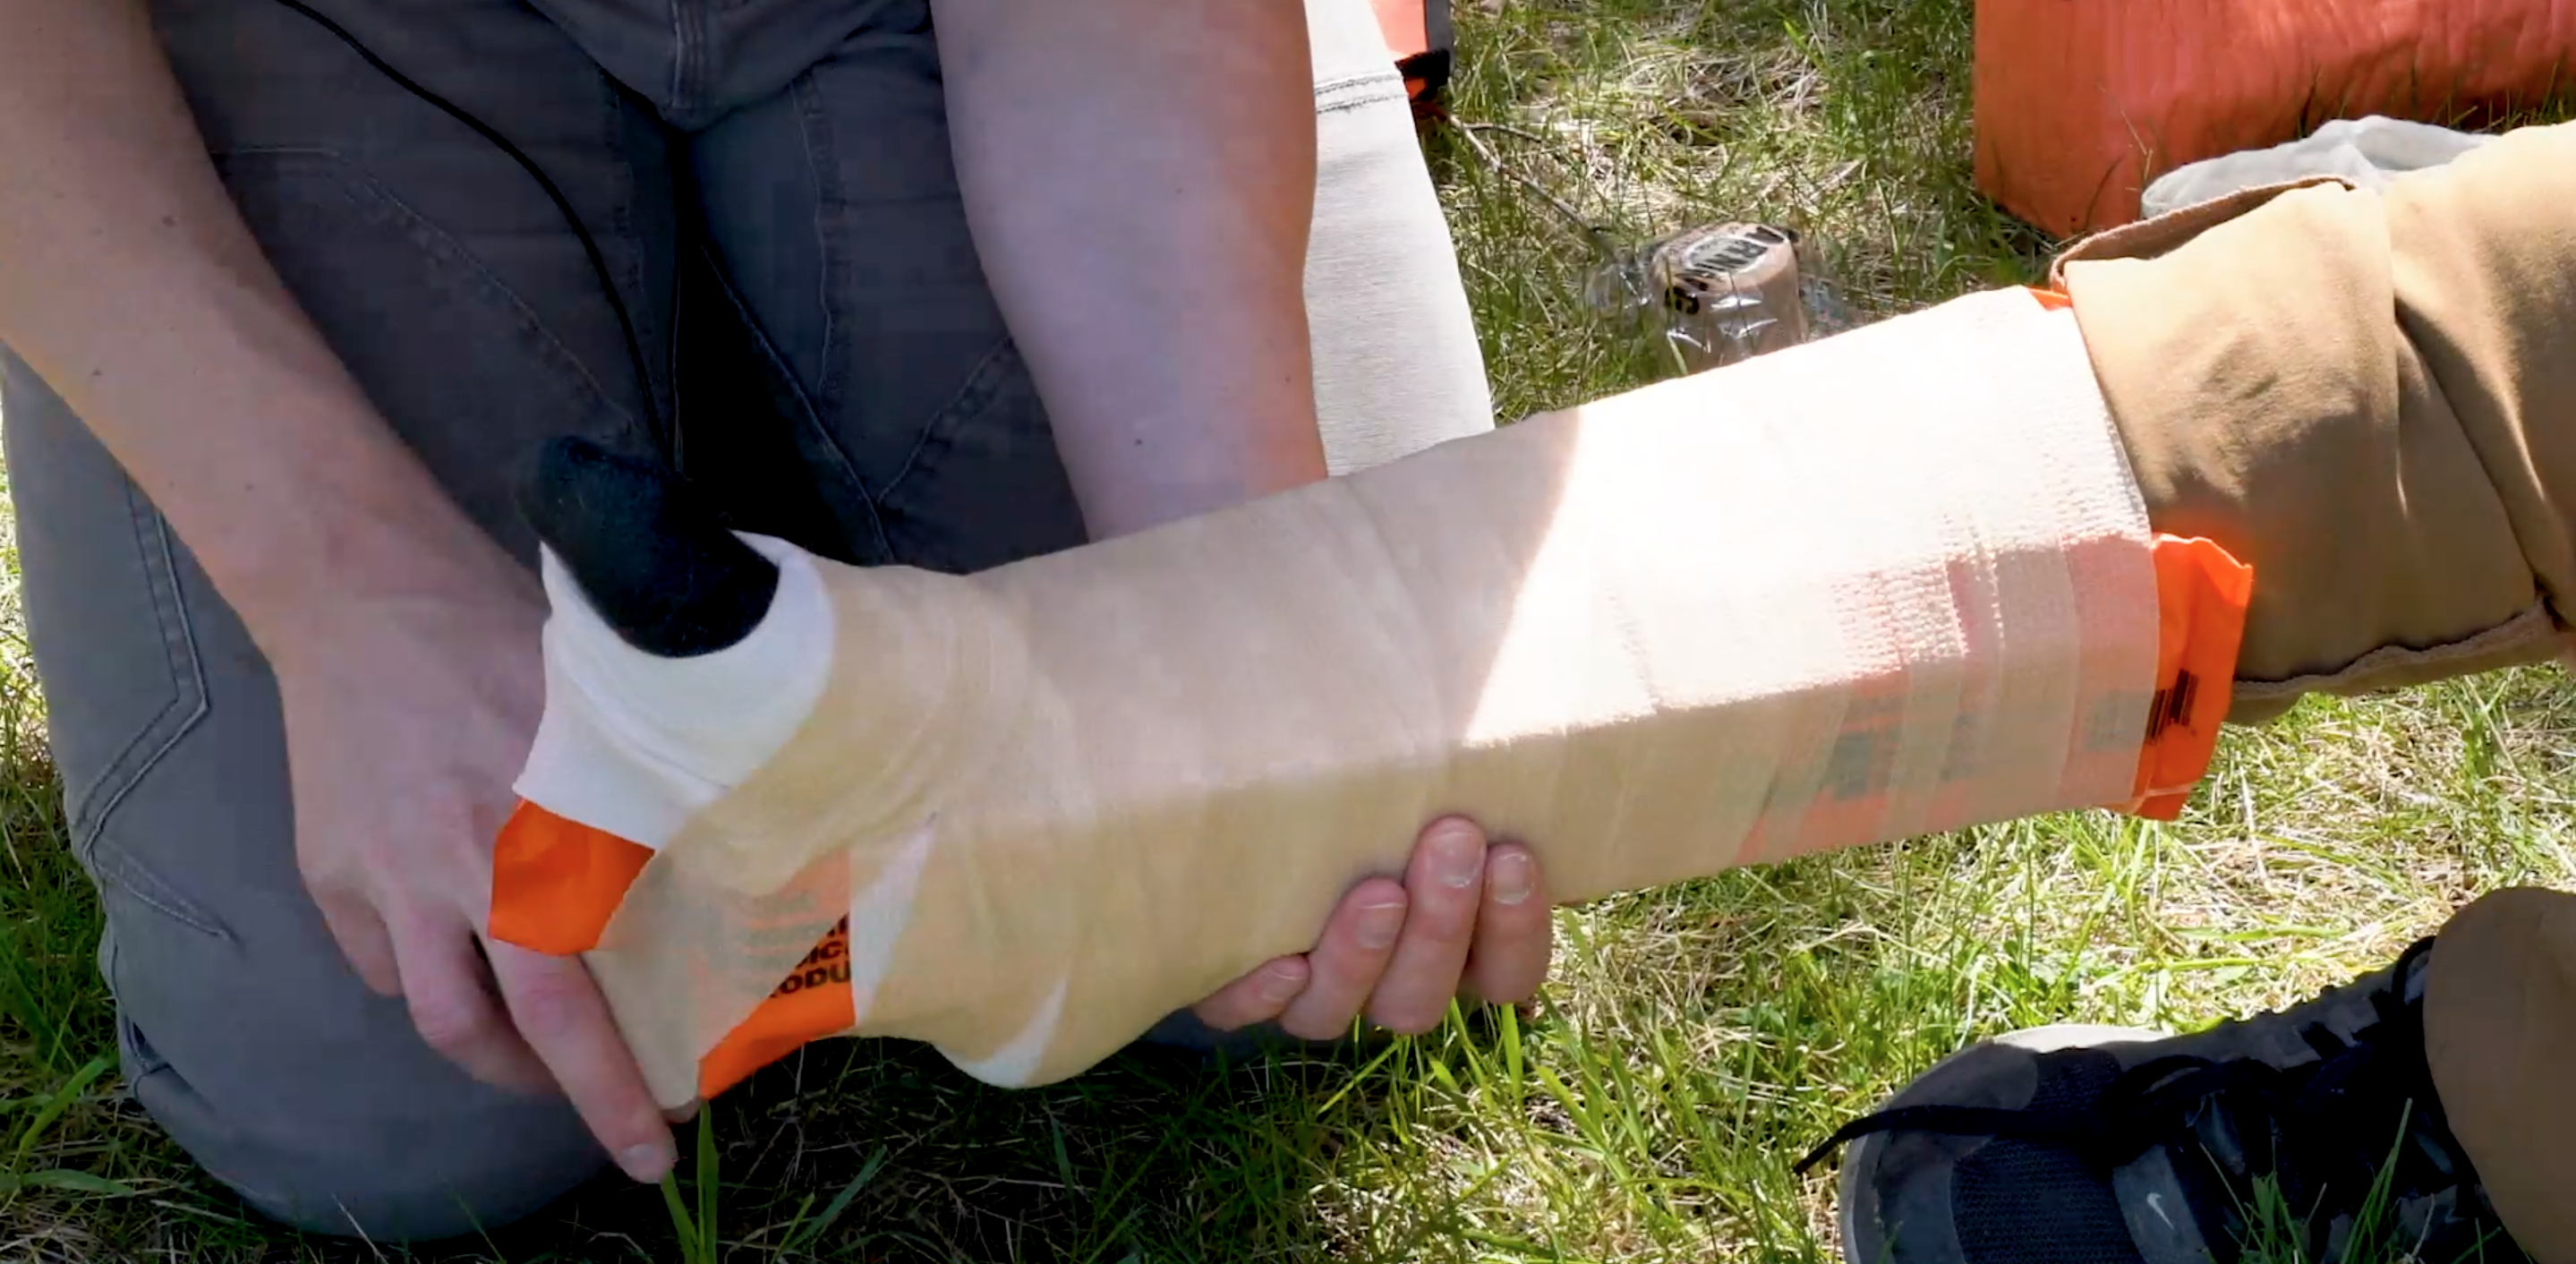 NREMT Practical Skills How-To: Extremity Splinting - Ankle